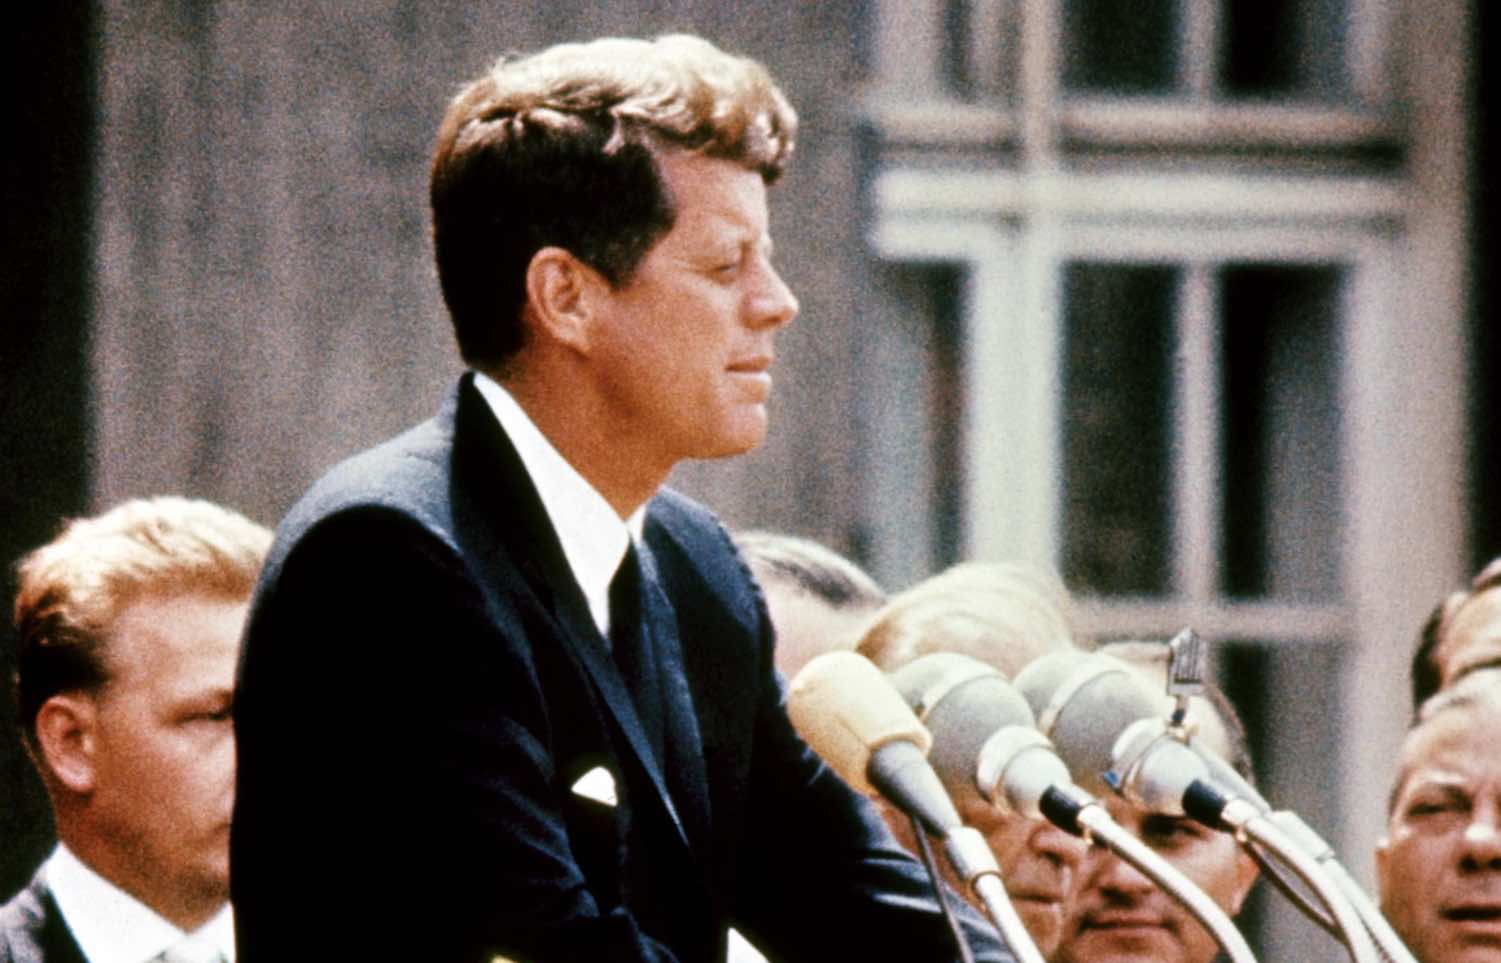 Kennedy's 'lost' speech brought to life 54 years after his death